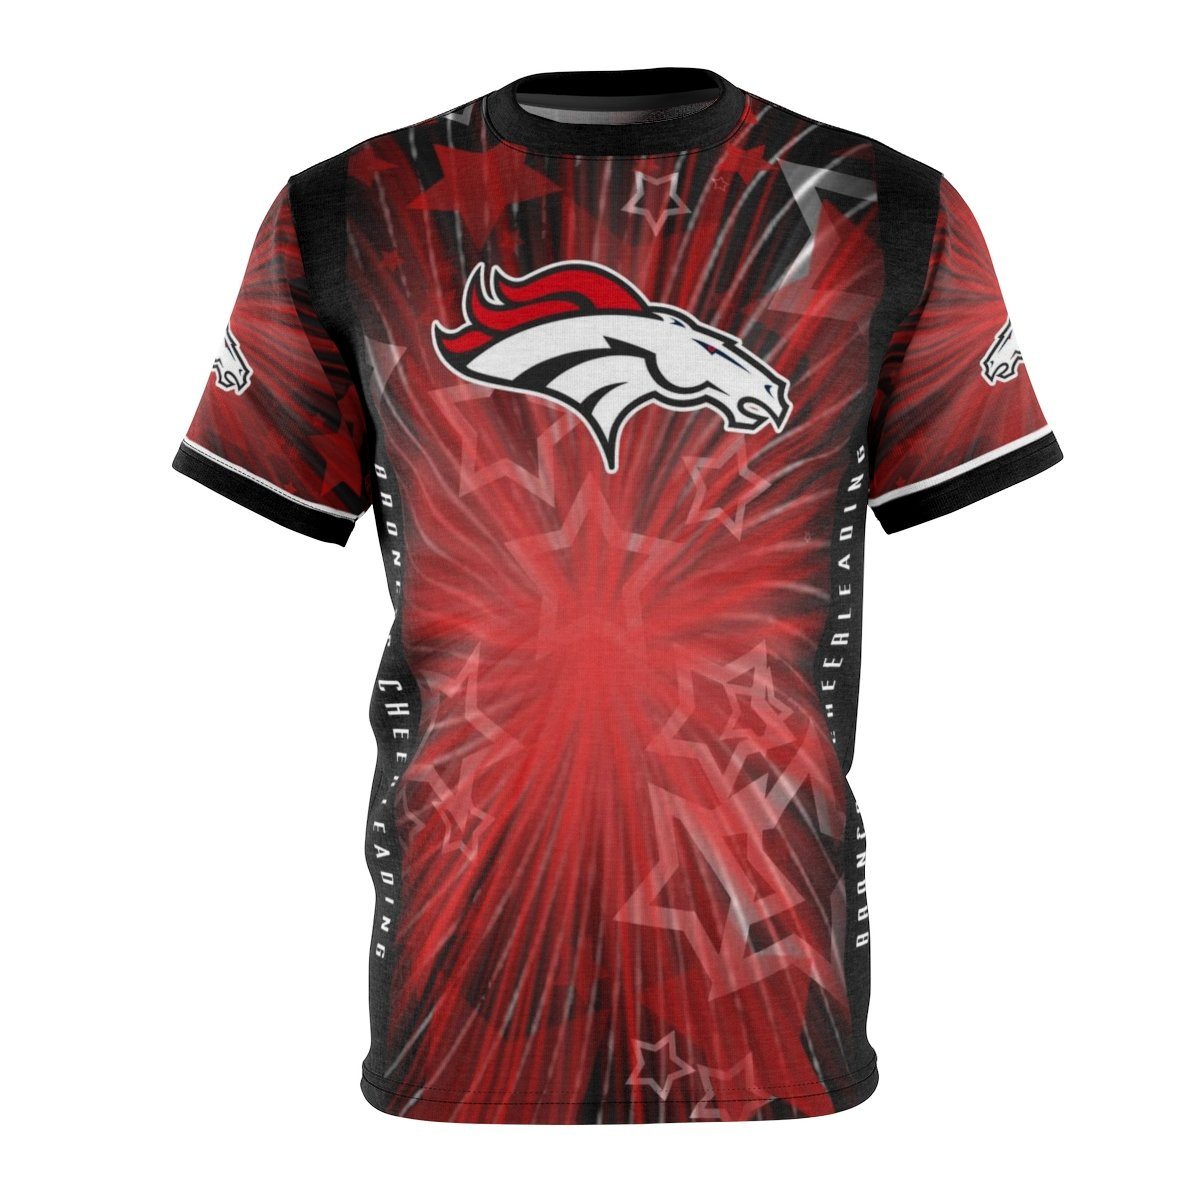 Spirit - V.1 - Extreme Sportswear Cut & Sew Shirt Template-Photoshop Template - Photo Solutions